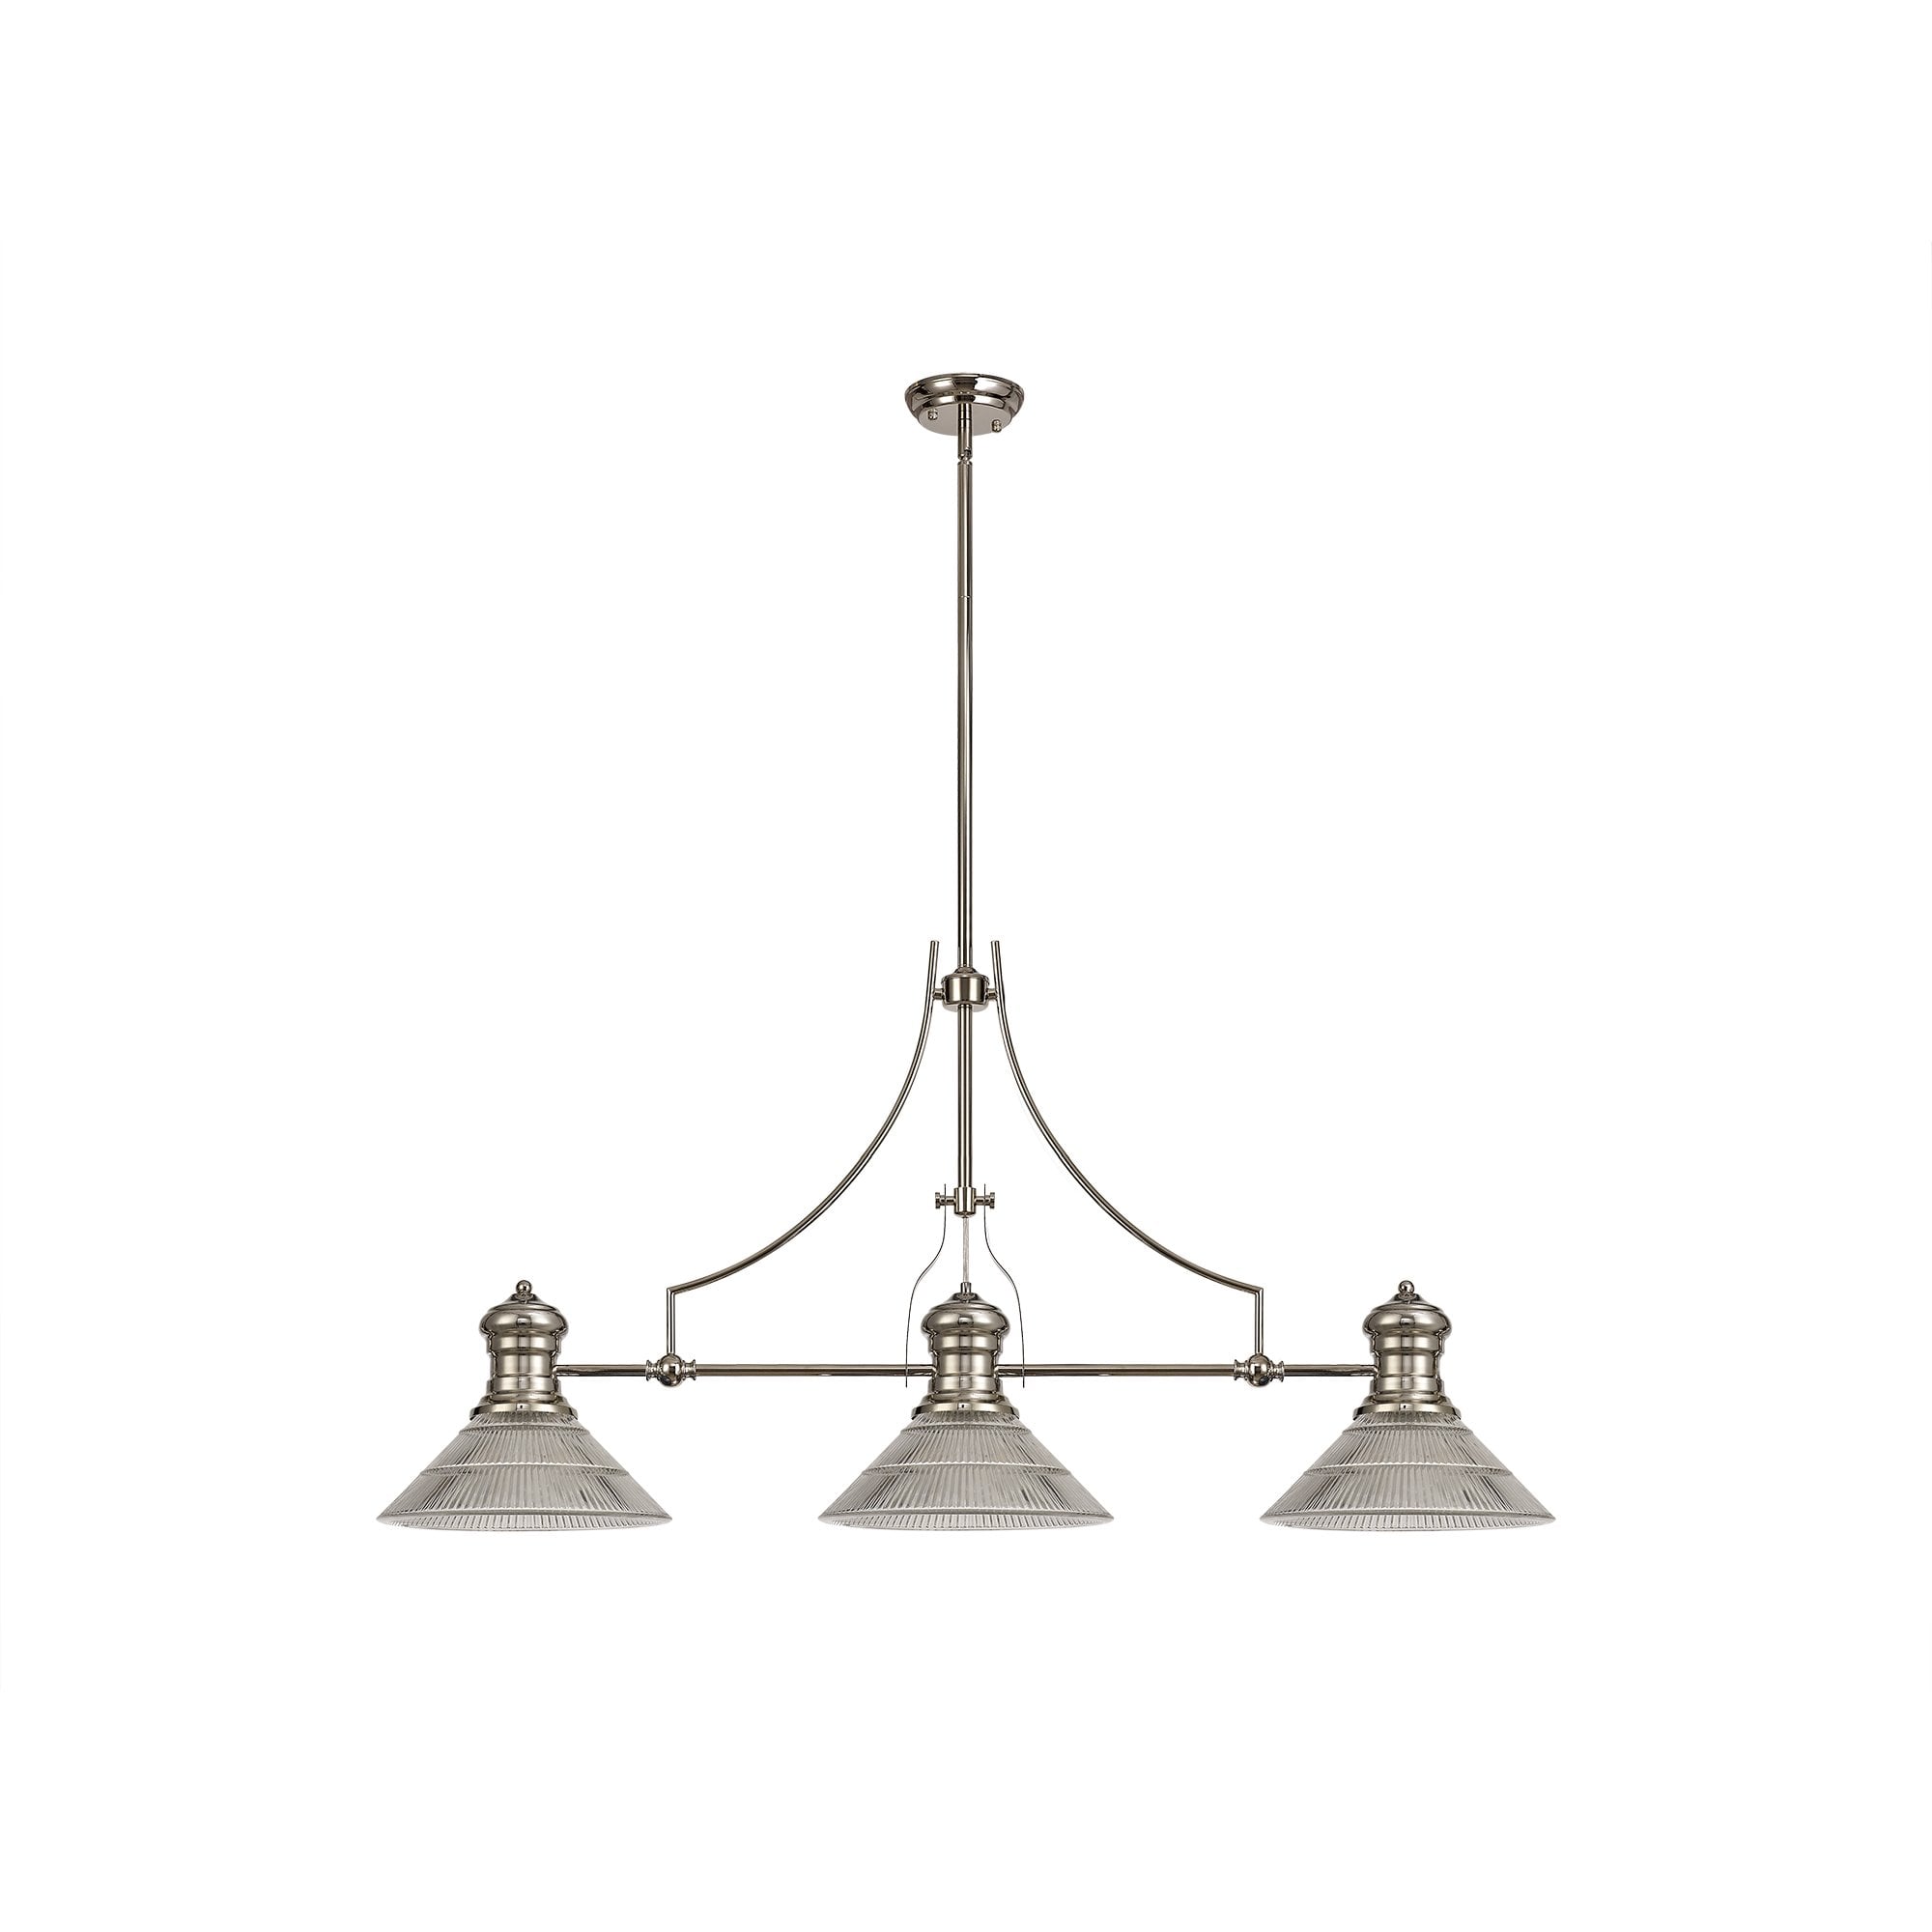 3 Light Telescopic Pendant E27 With 30cm Cone Glass Shade, Polished Nickel/Clear